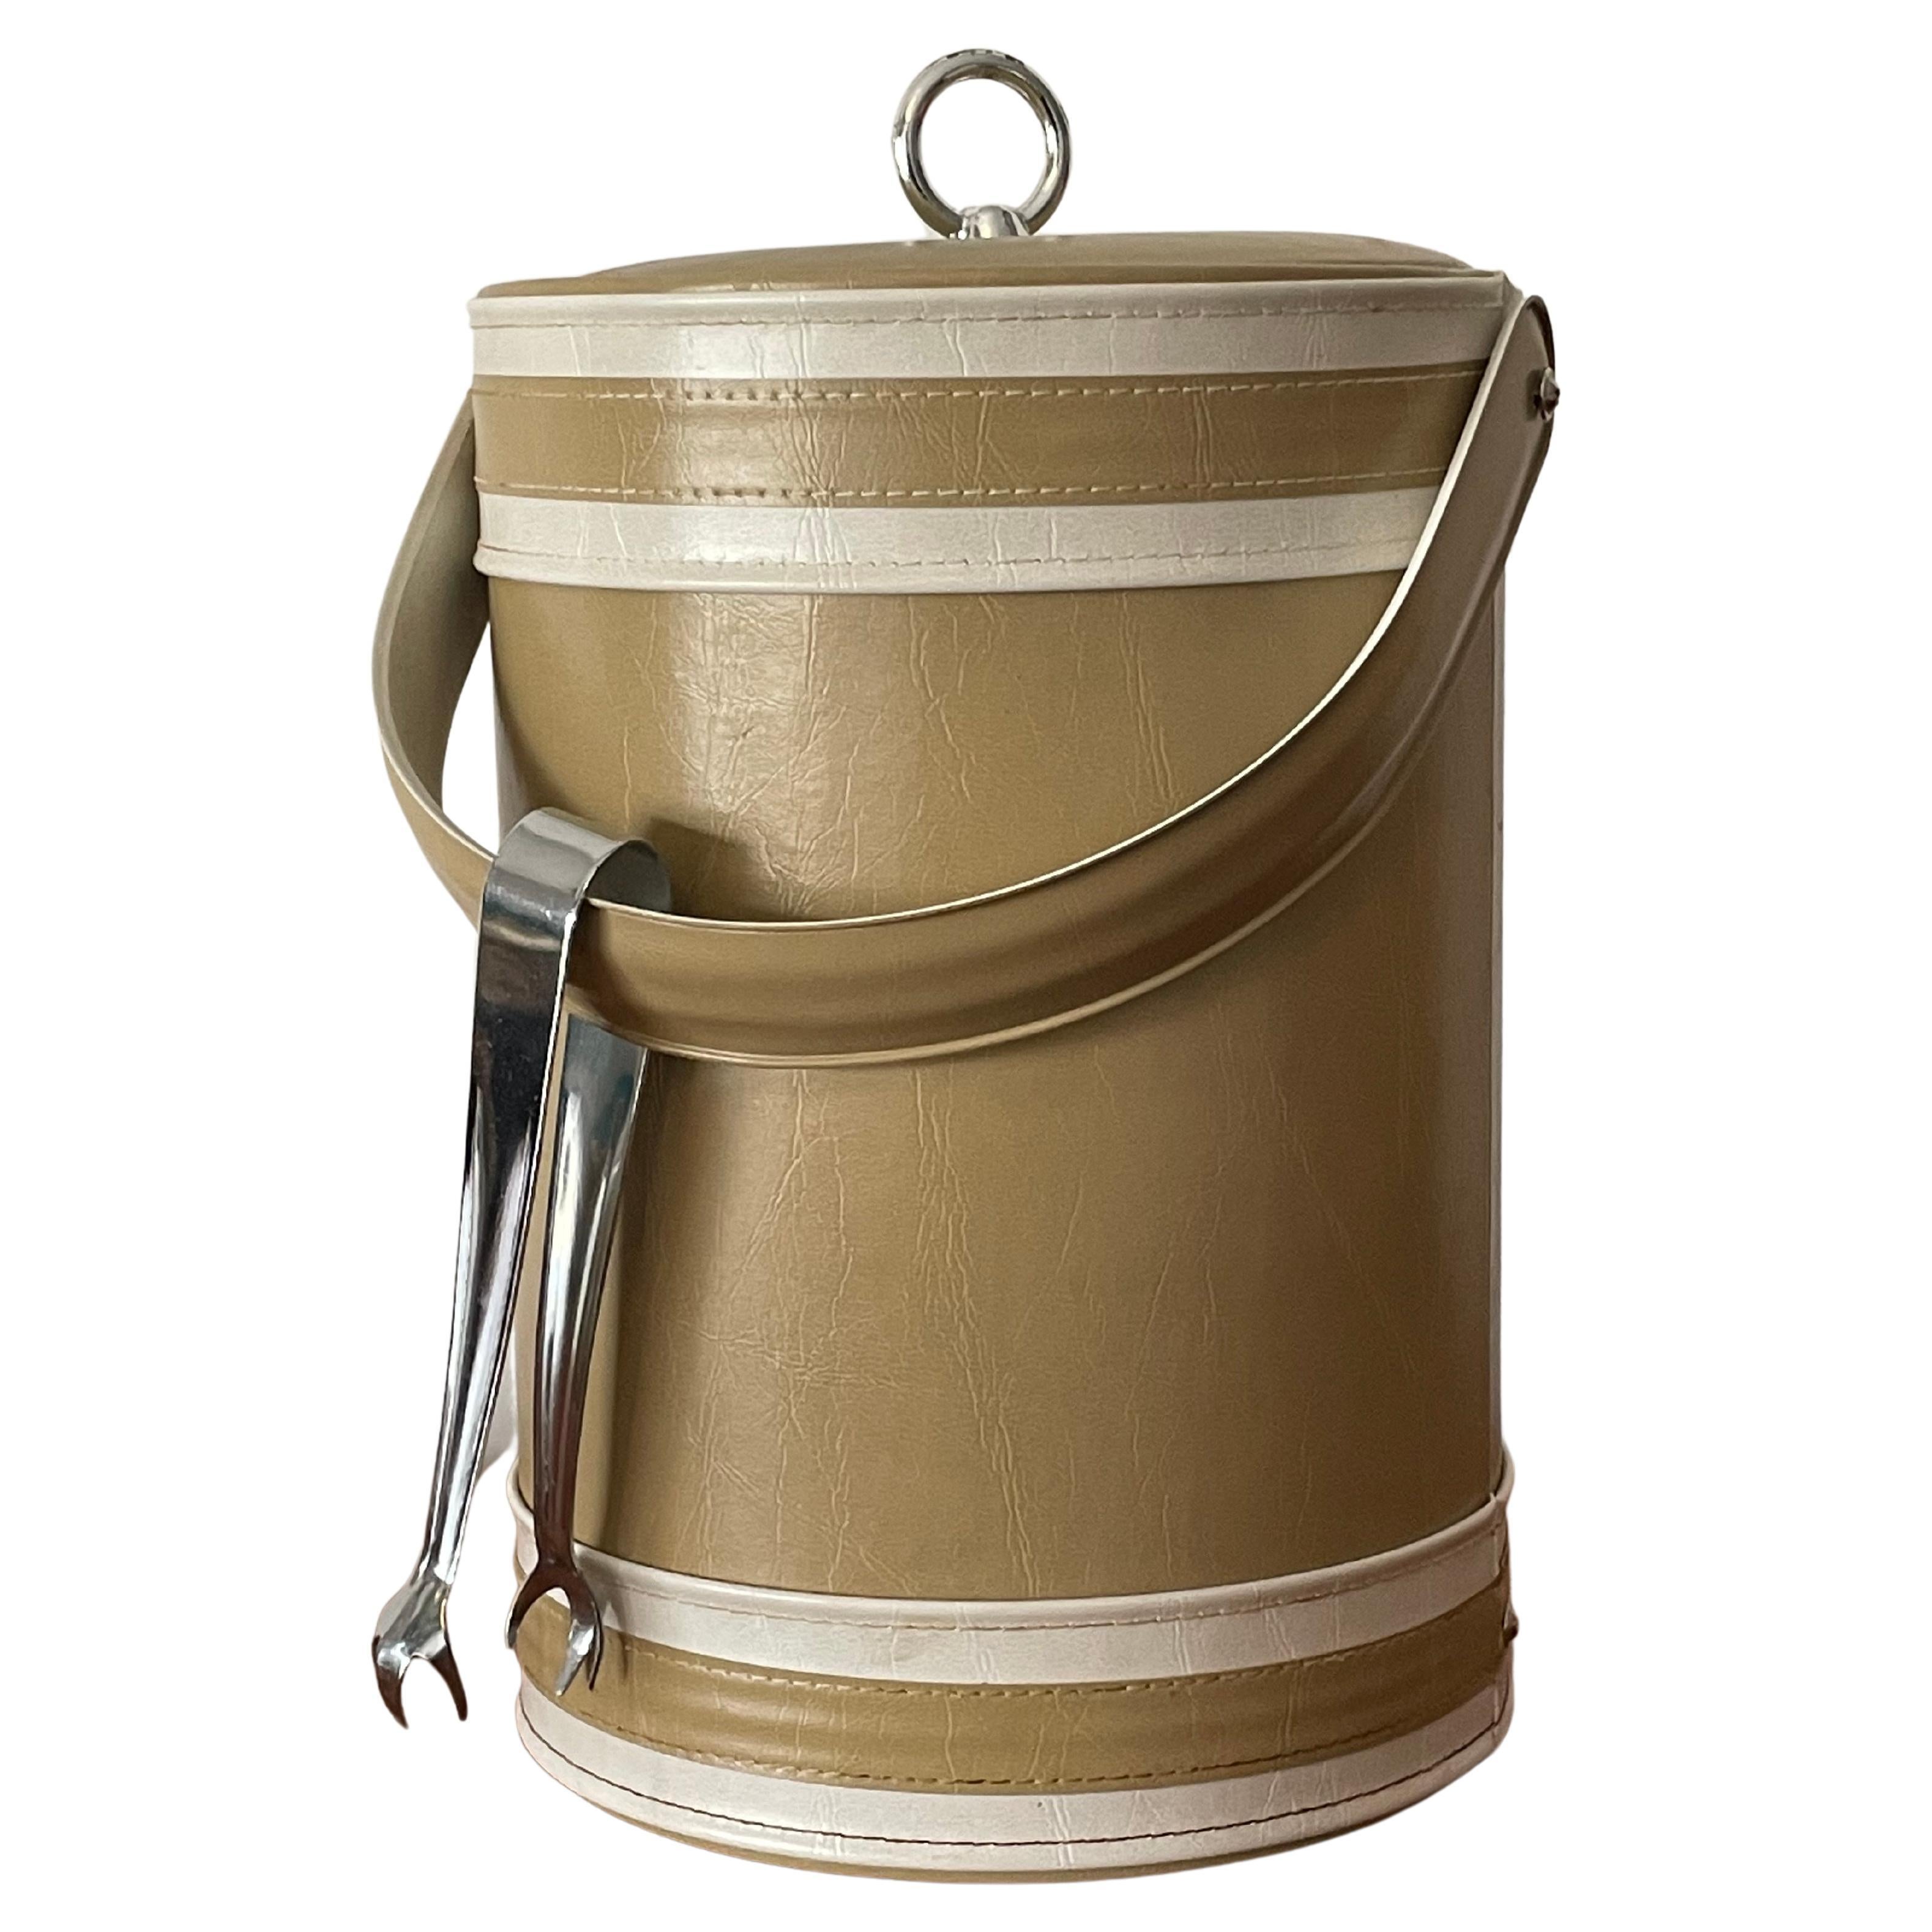 Plaid Cloth and Gold Exterior Vintage Georges Briard Ice Bucket